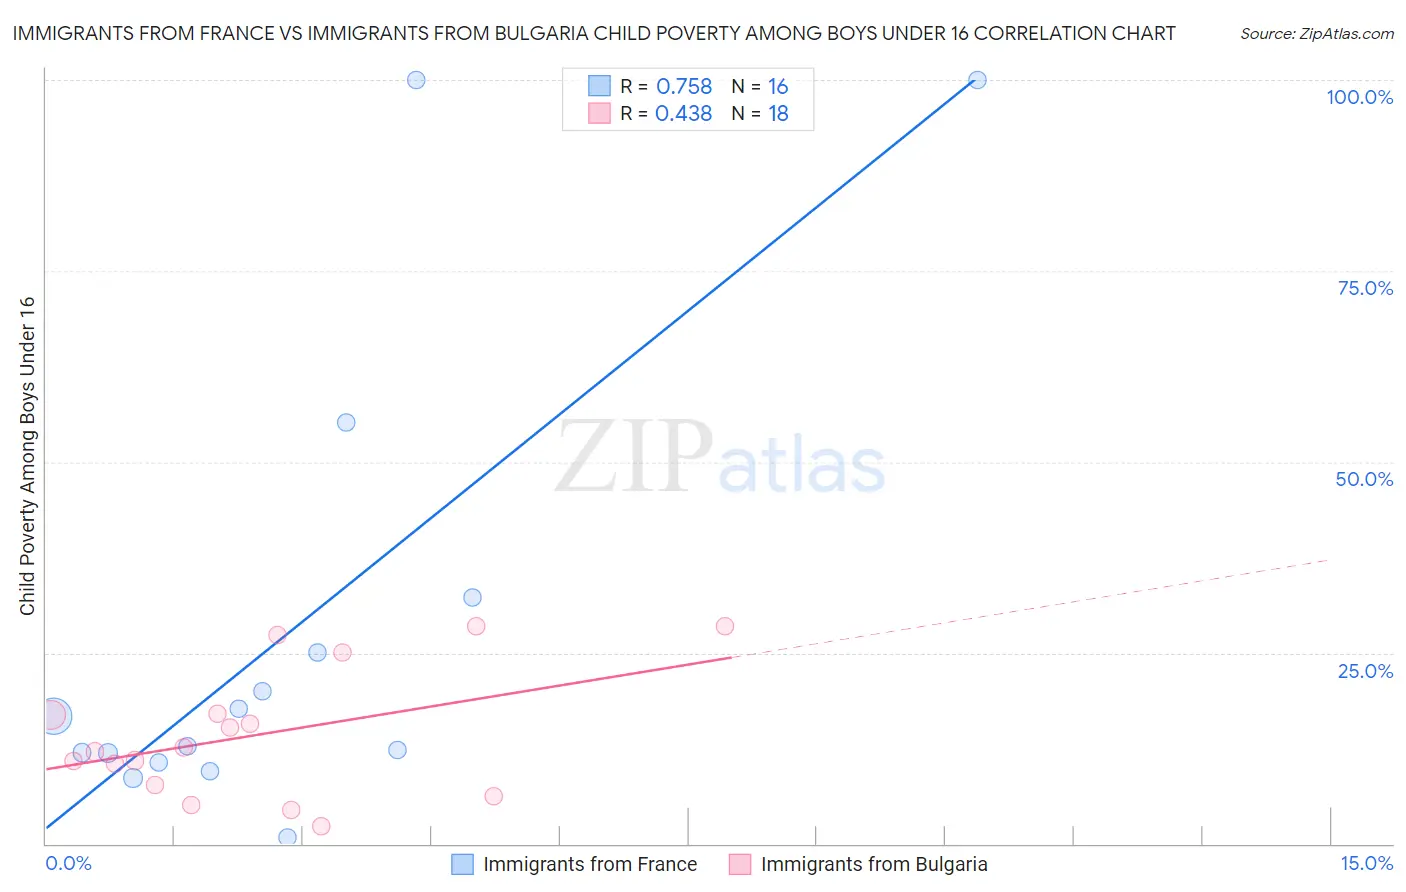 Immigrants from France vs Immigrants from Bulgaria Child Poverty Among Boys Under 16